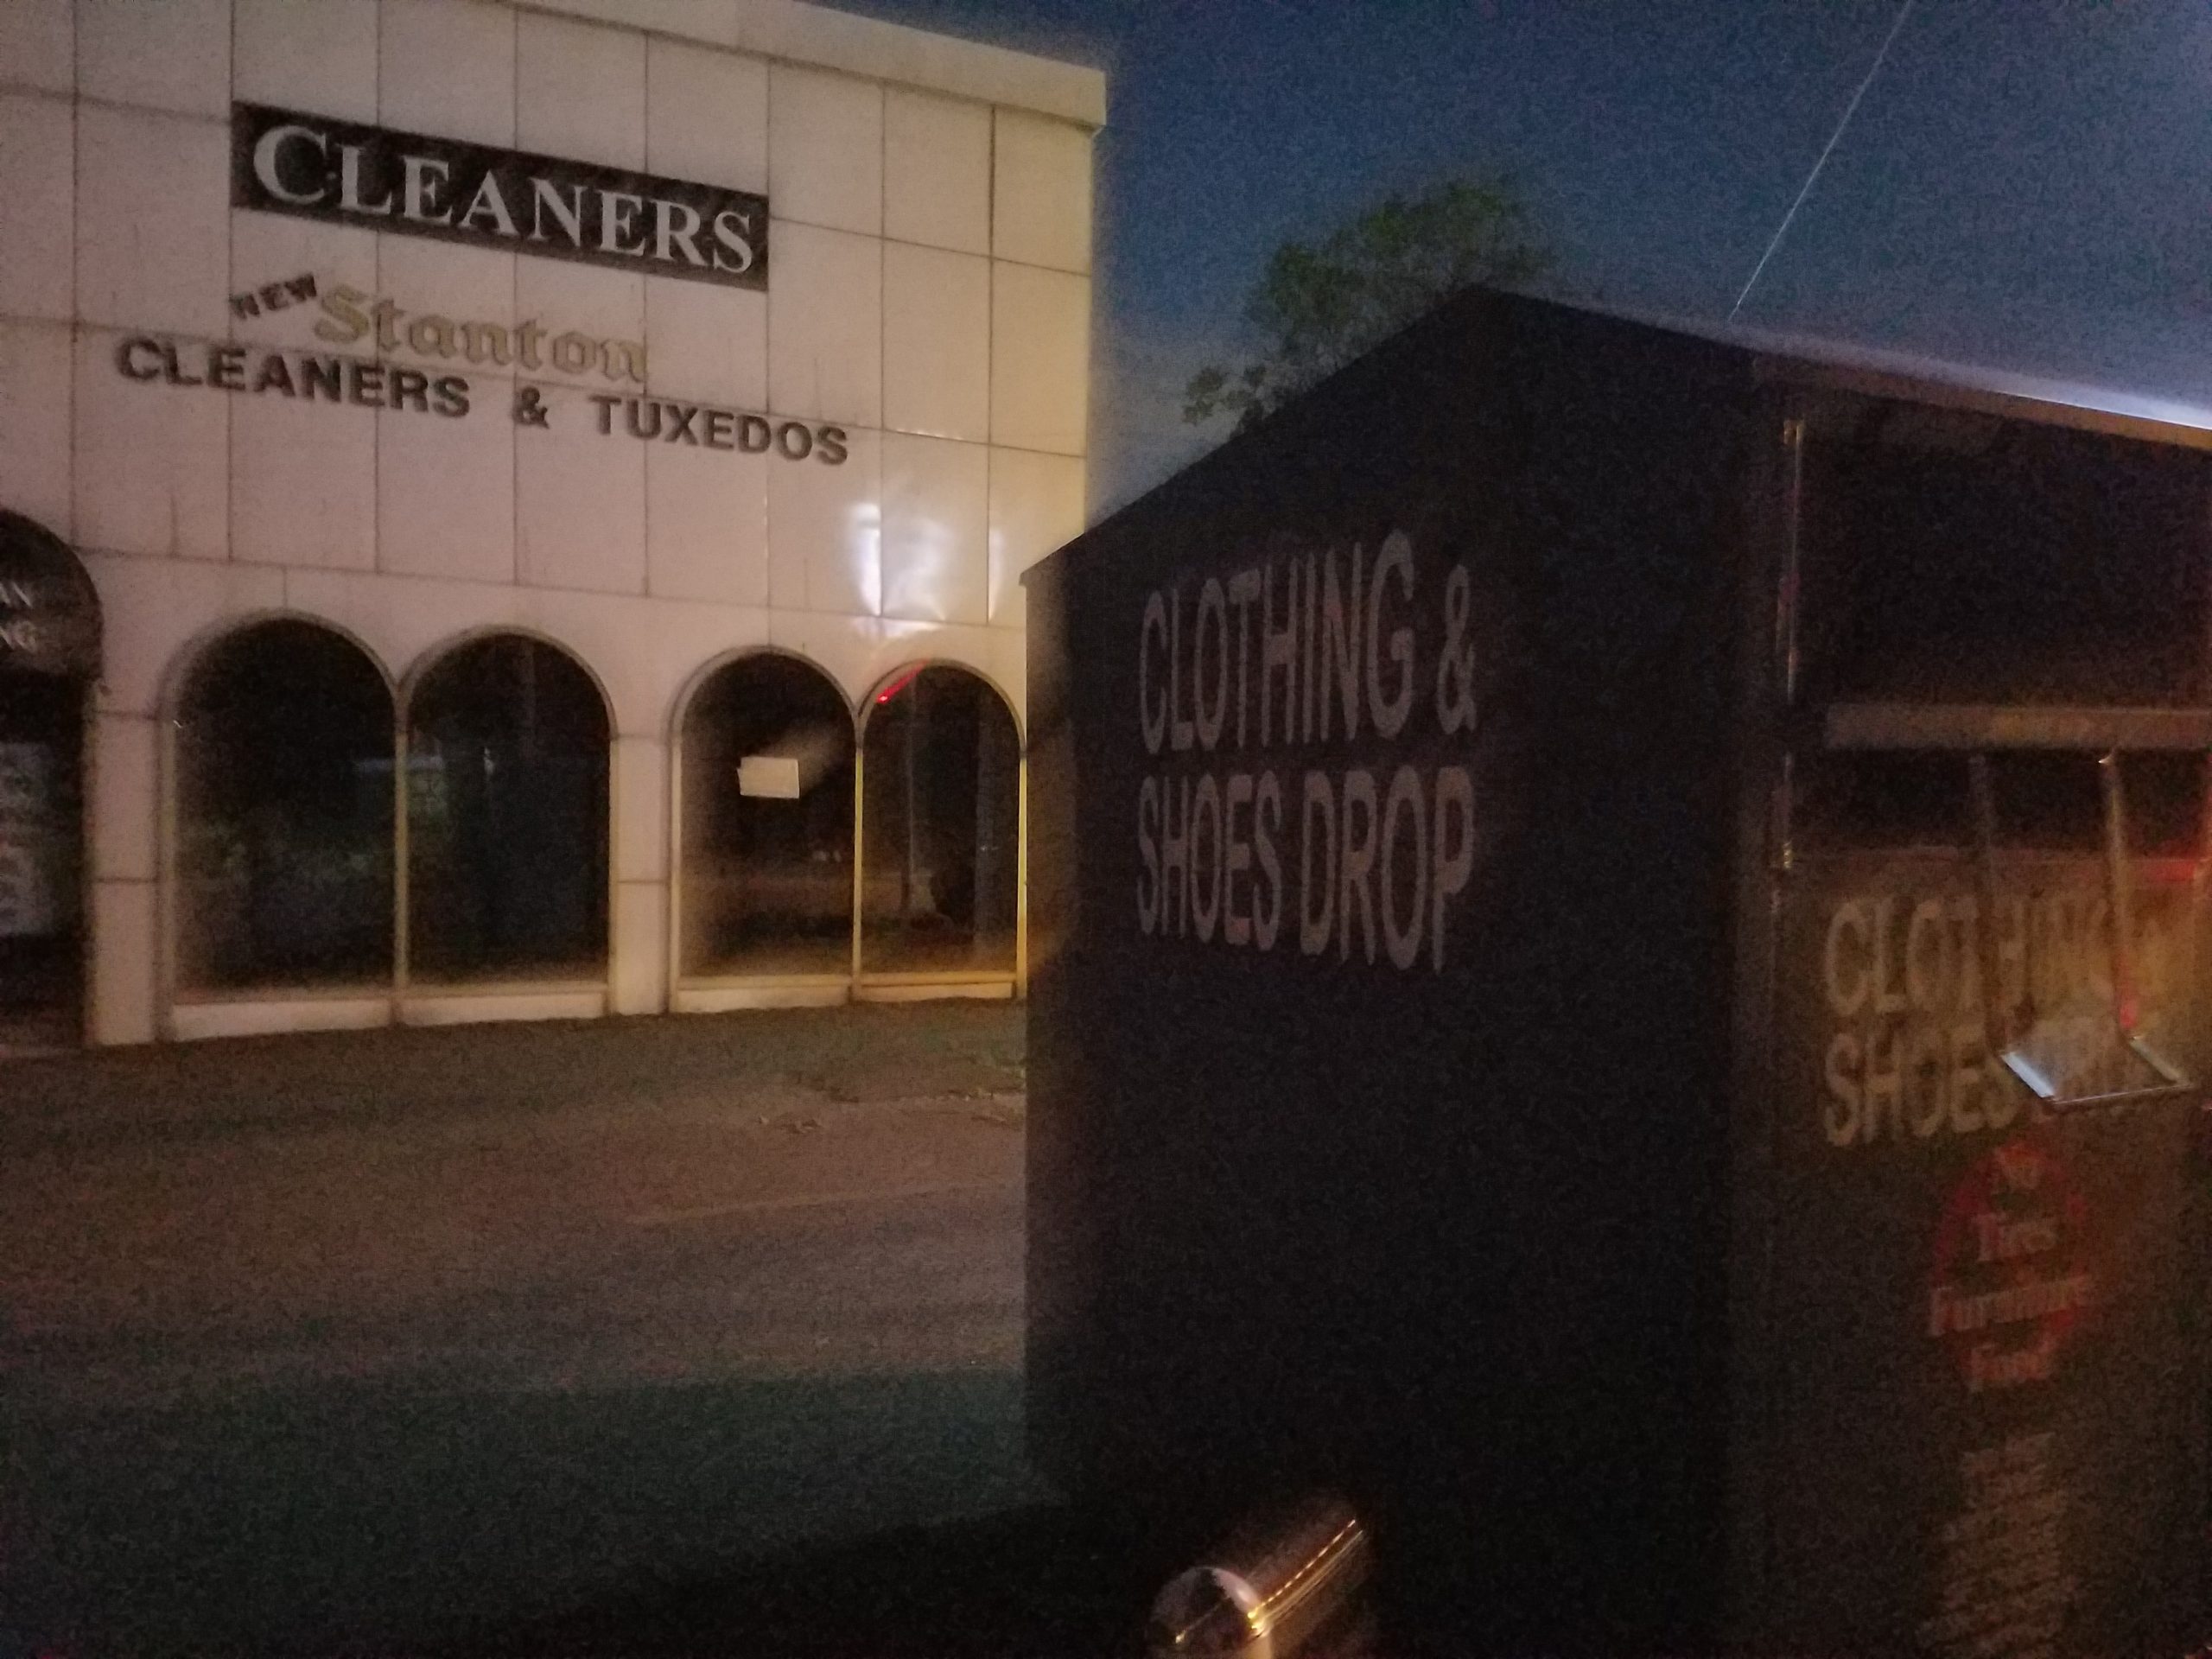 One of the collection bins that Great Neck Plaza trustees hope to regulate sits in front of the old Stanton Cleaners site at the end of Cuttermill Road. (Photo by Janelle Clausen)